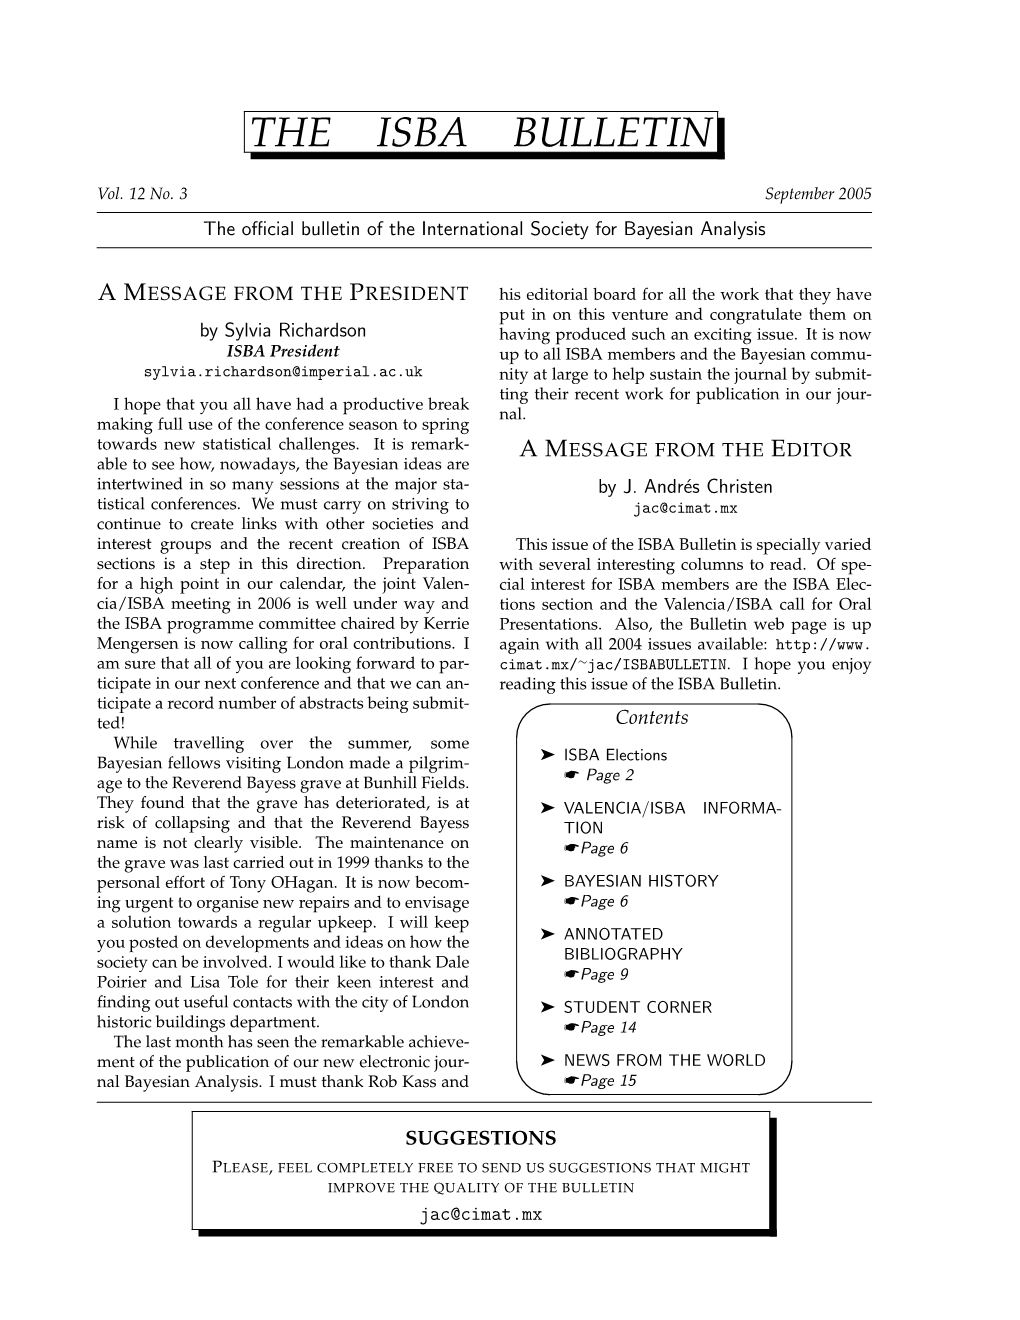 September 2005 the Oﬃcial Bulletin of the International Society for Bayesian Analysis